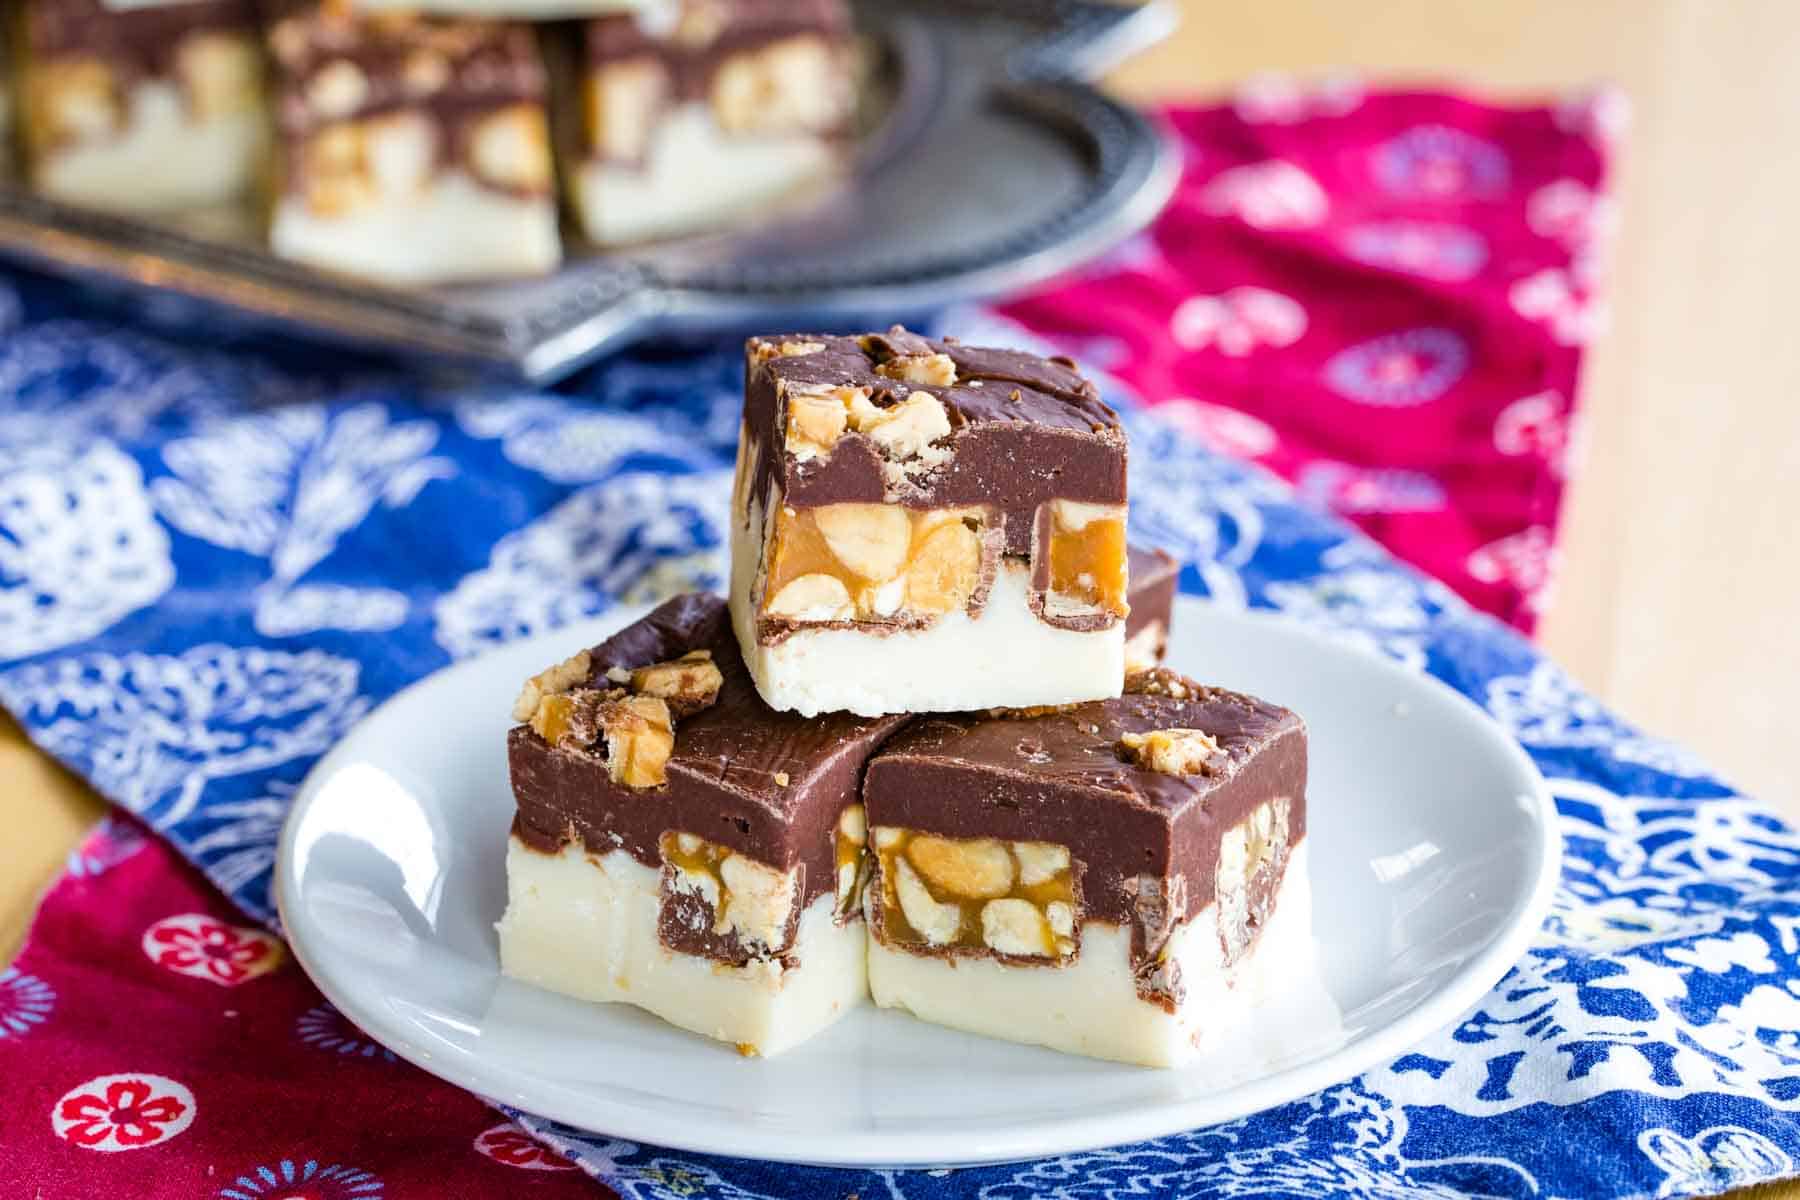 Pieces of Snickers Fudge on a plate on top of two criss-crossed cloth napkins.